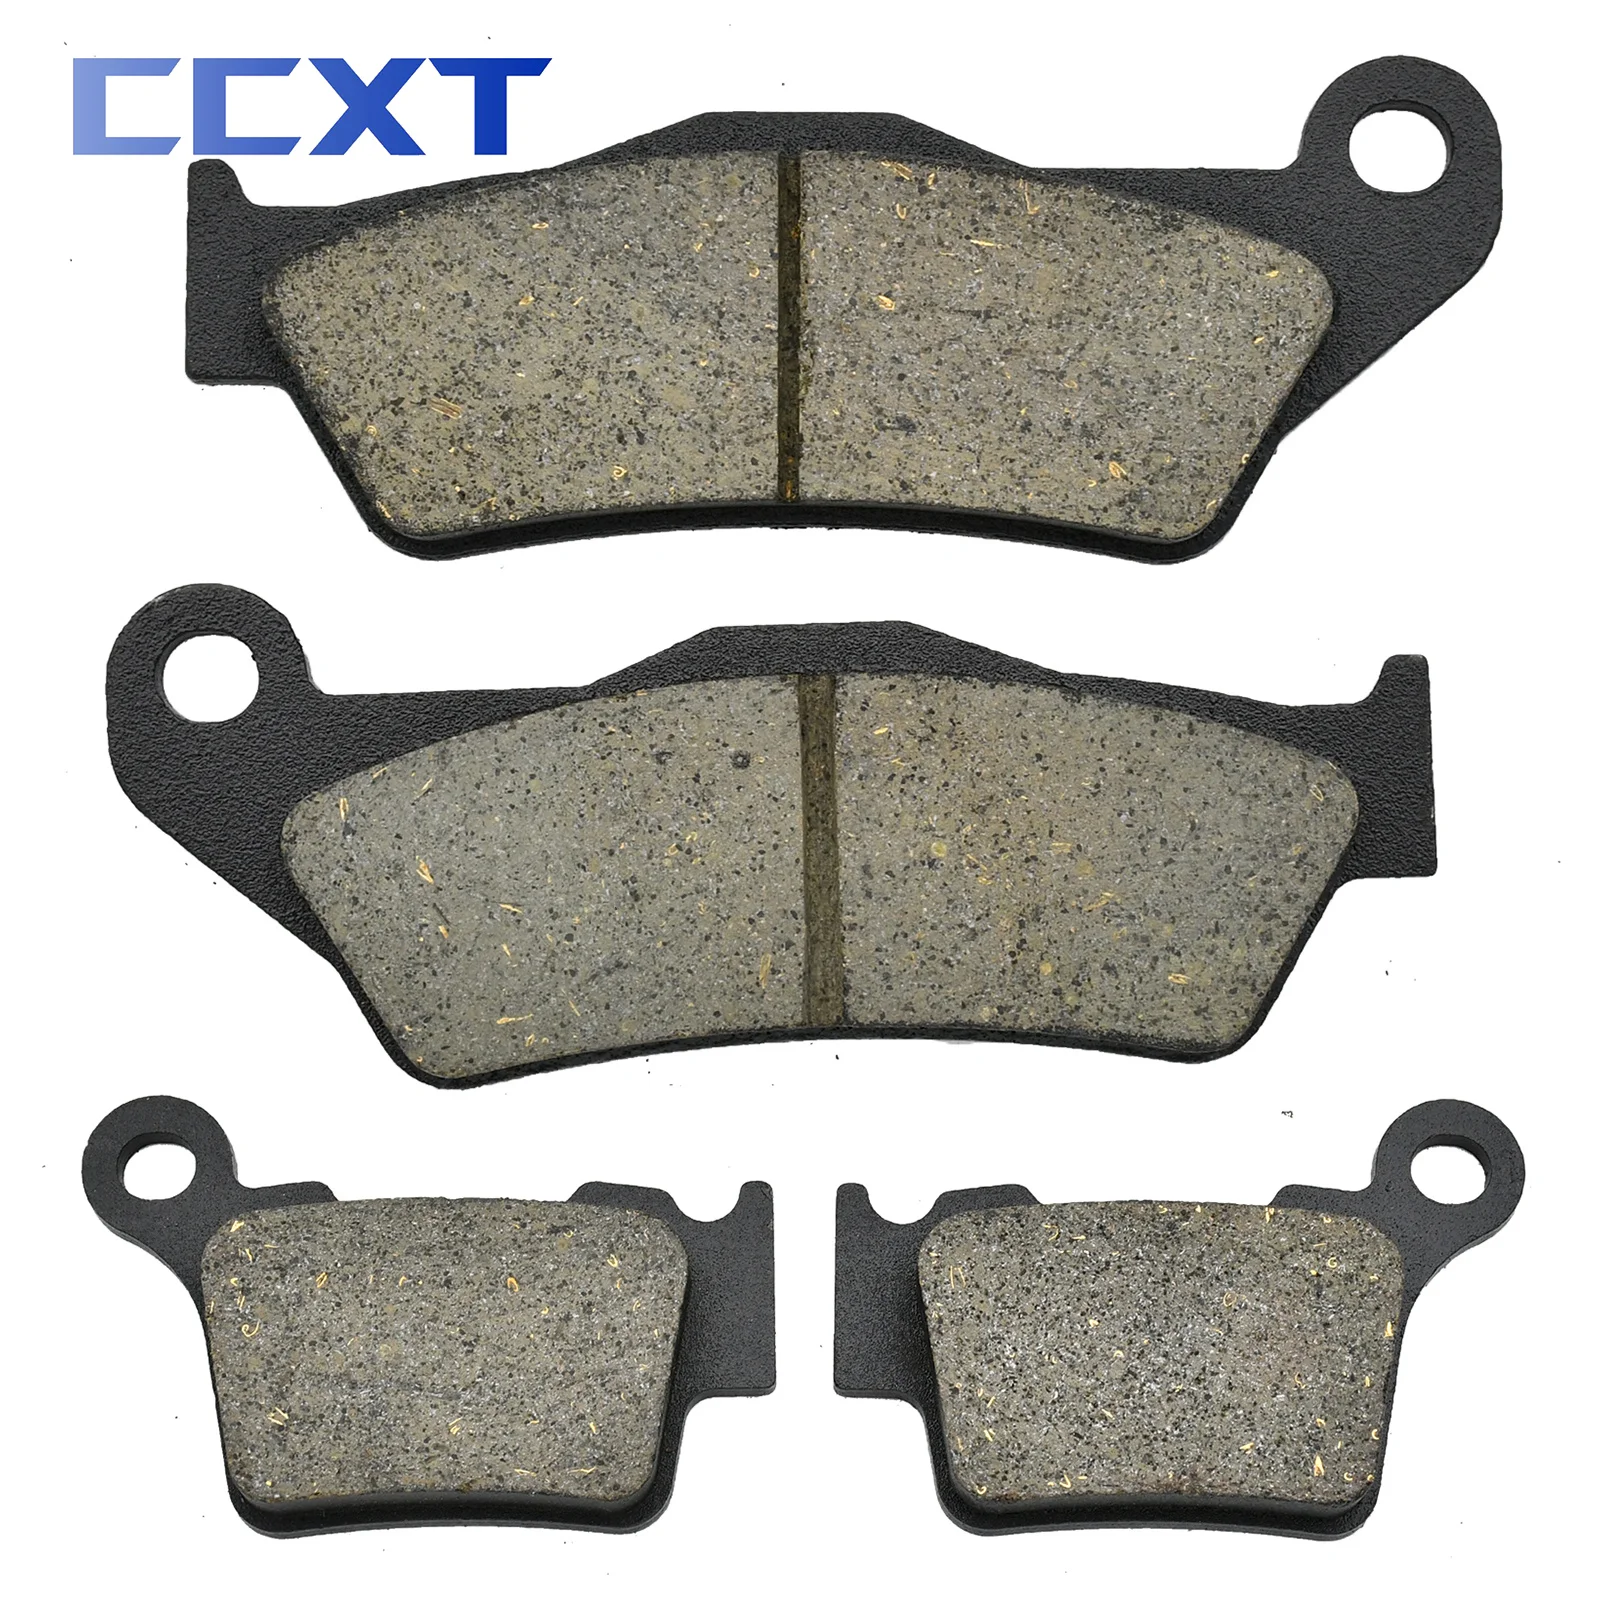 

Motorcycle Front and Rear Brake Pads For Husqvarna CR FC FE FX TC TE WR TXC For KTM SX XC XC-F XCW SXF EXC EXCF XCRW 85cc-530cc